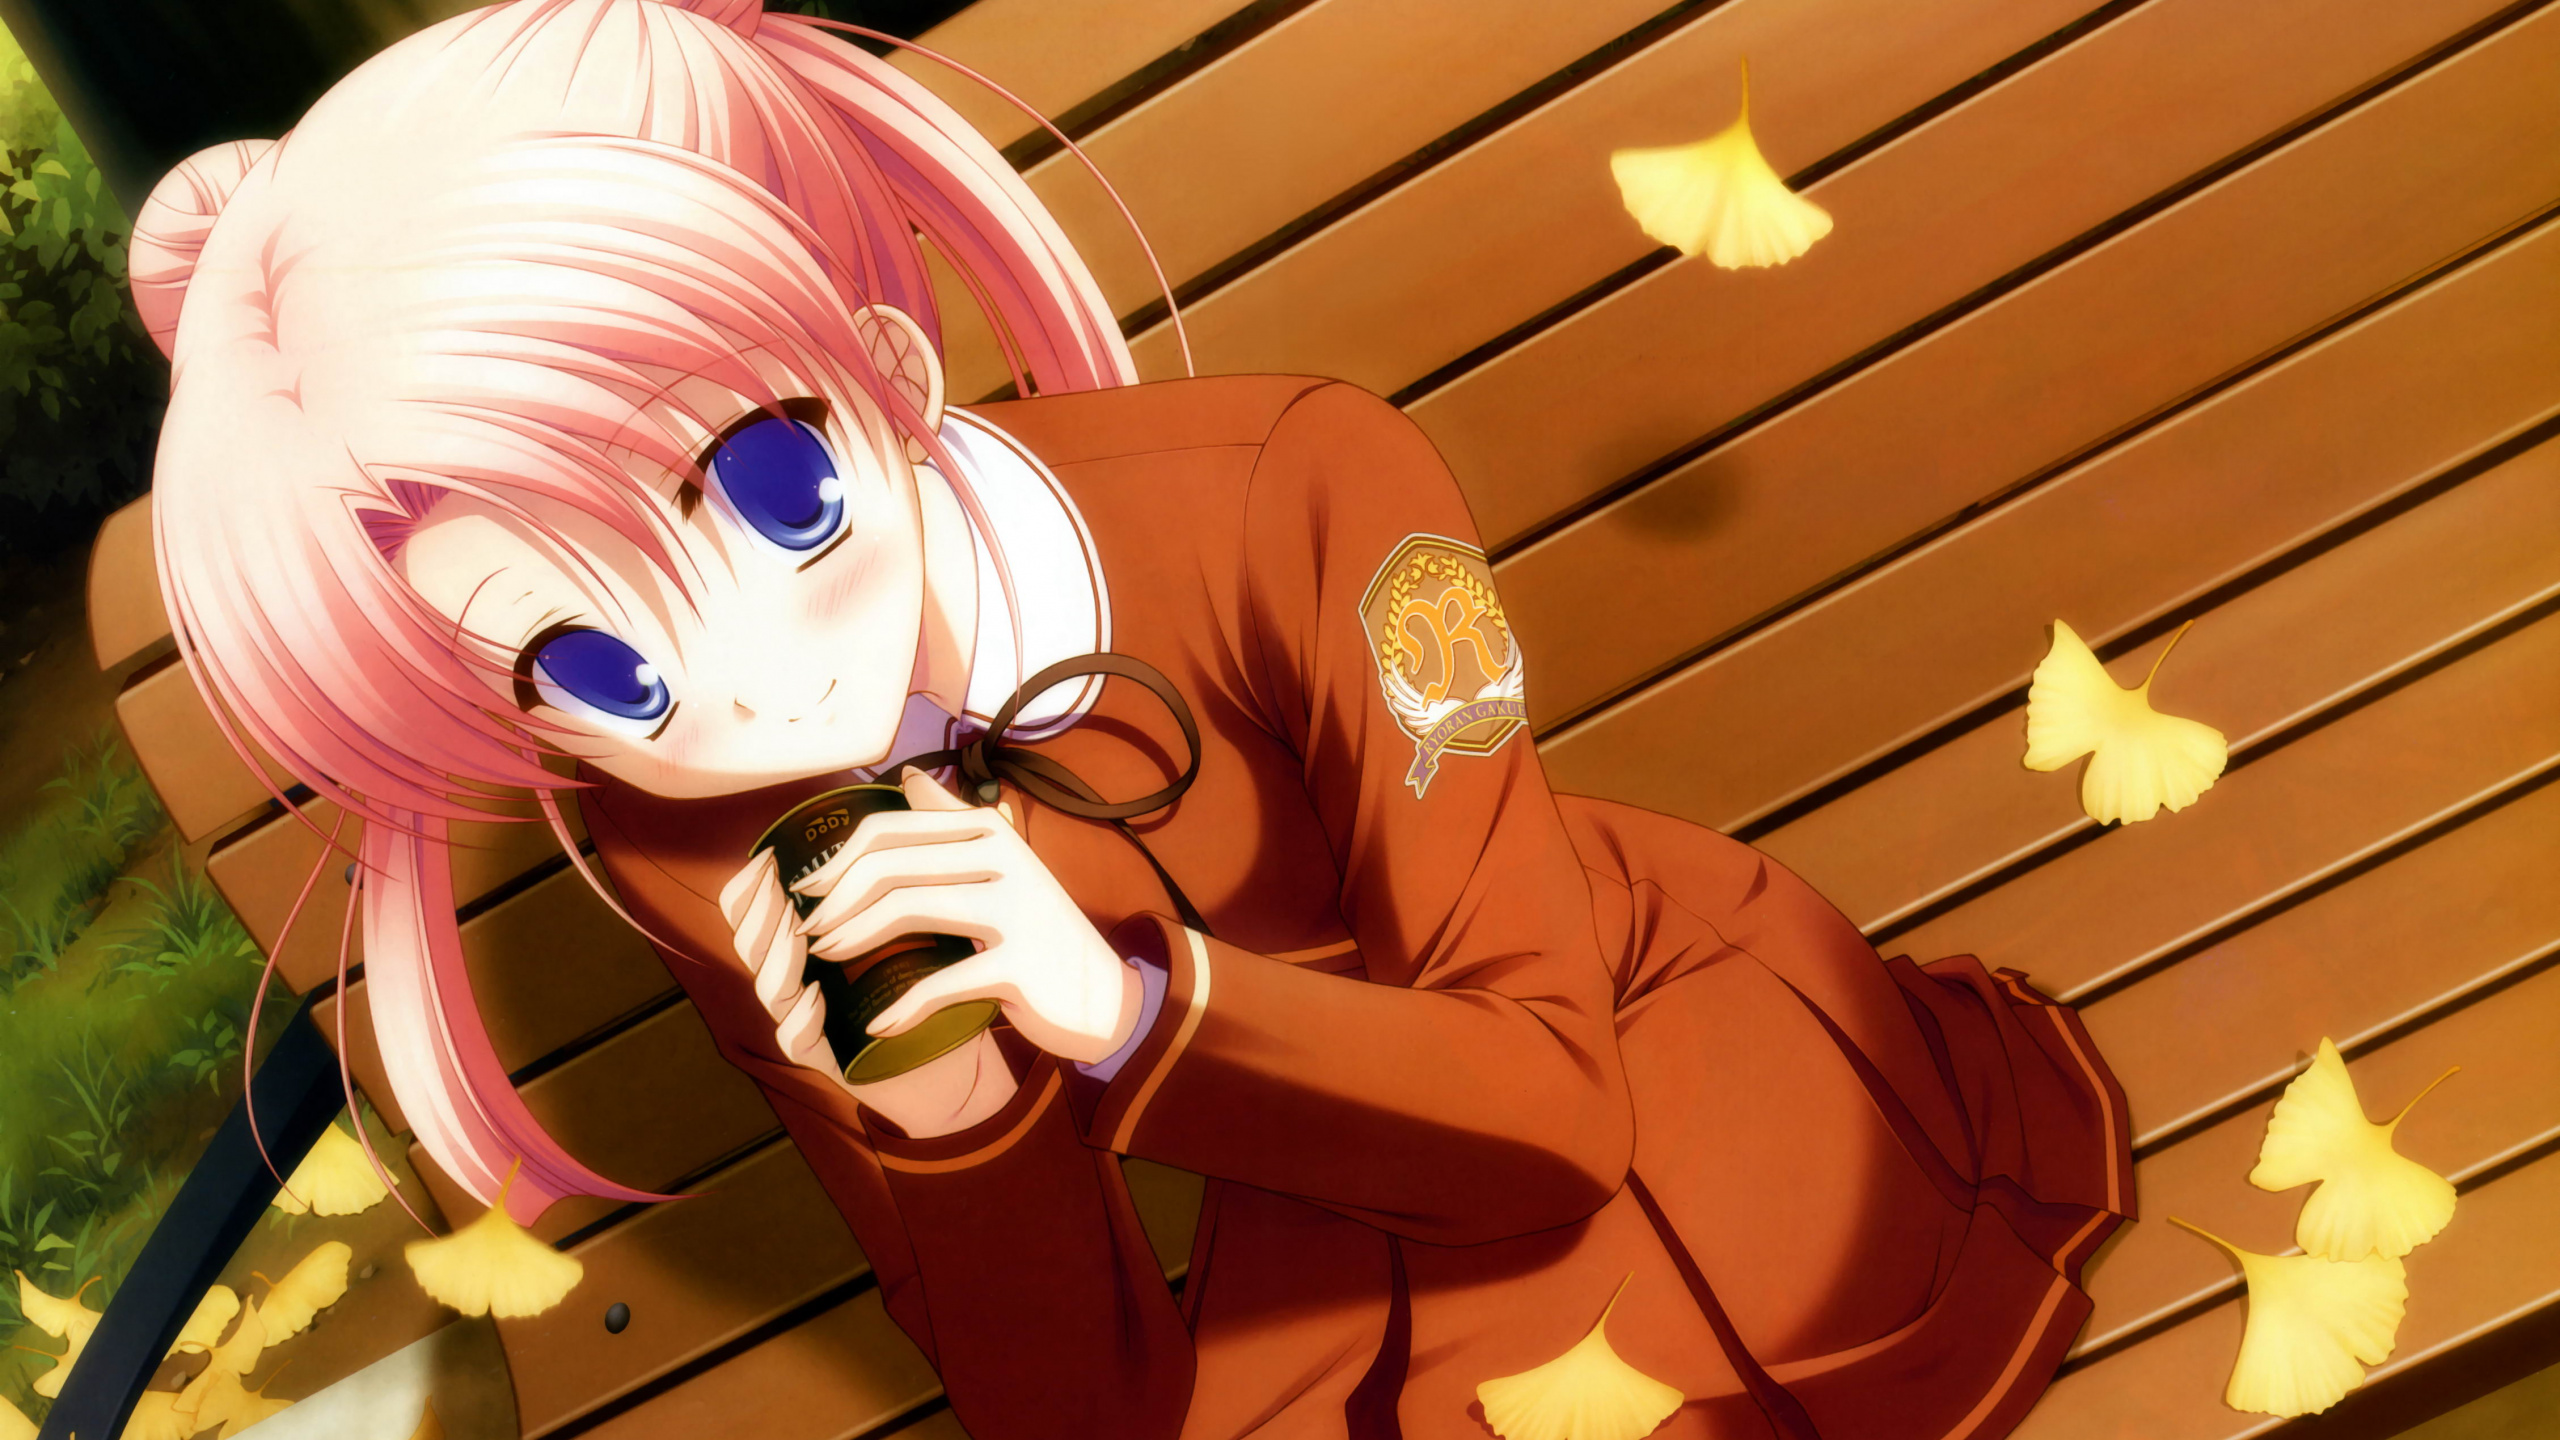 Girl in Brown Long Sleeve Shirt Anime Character. Wallpaper in 2560x1440 Resolution